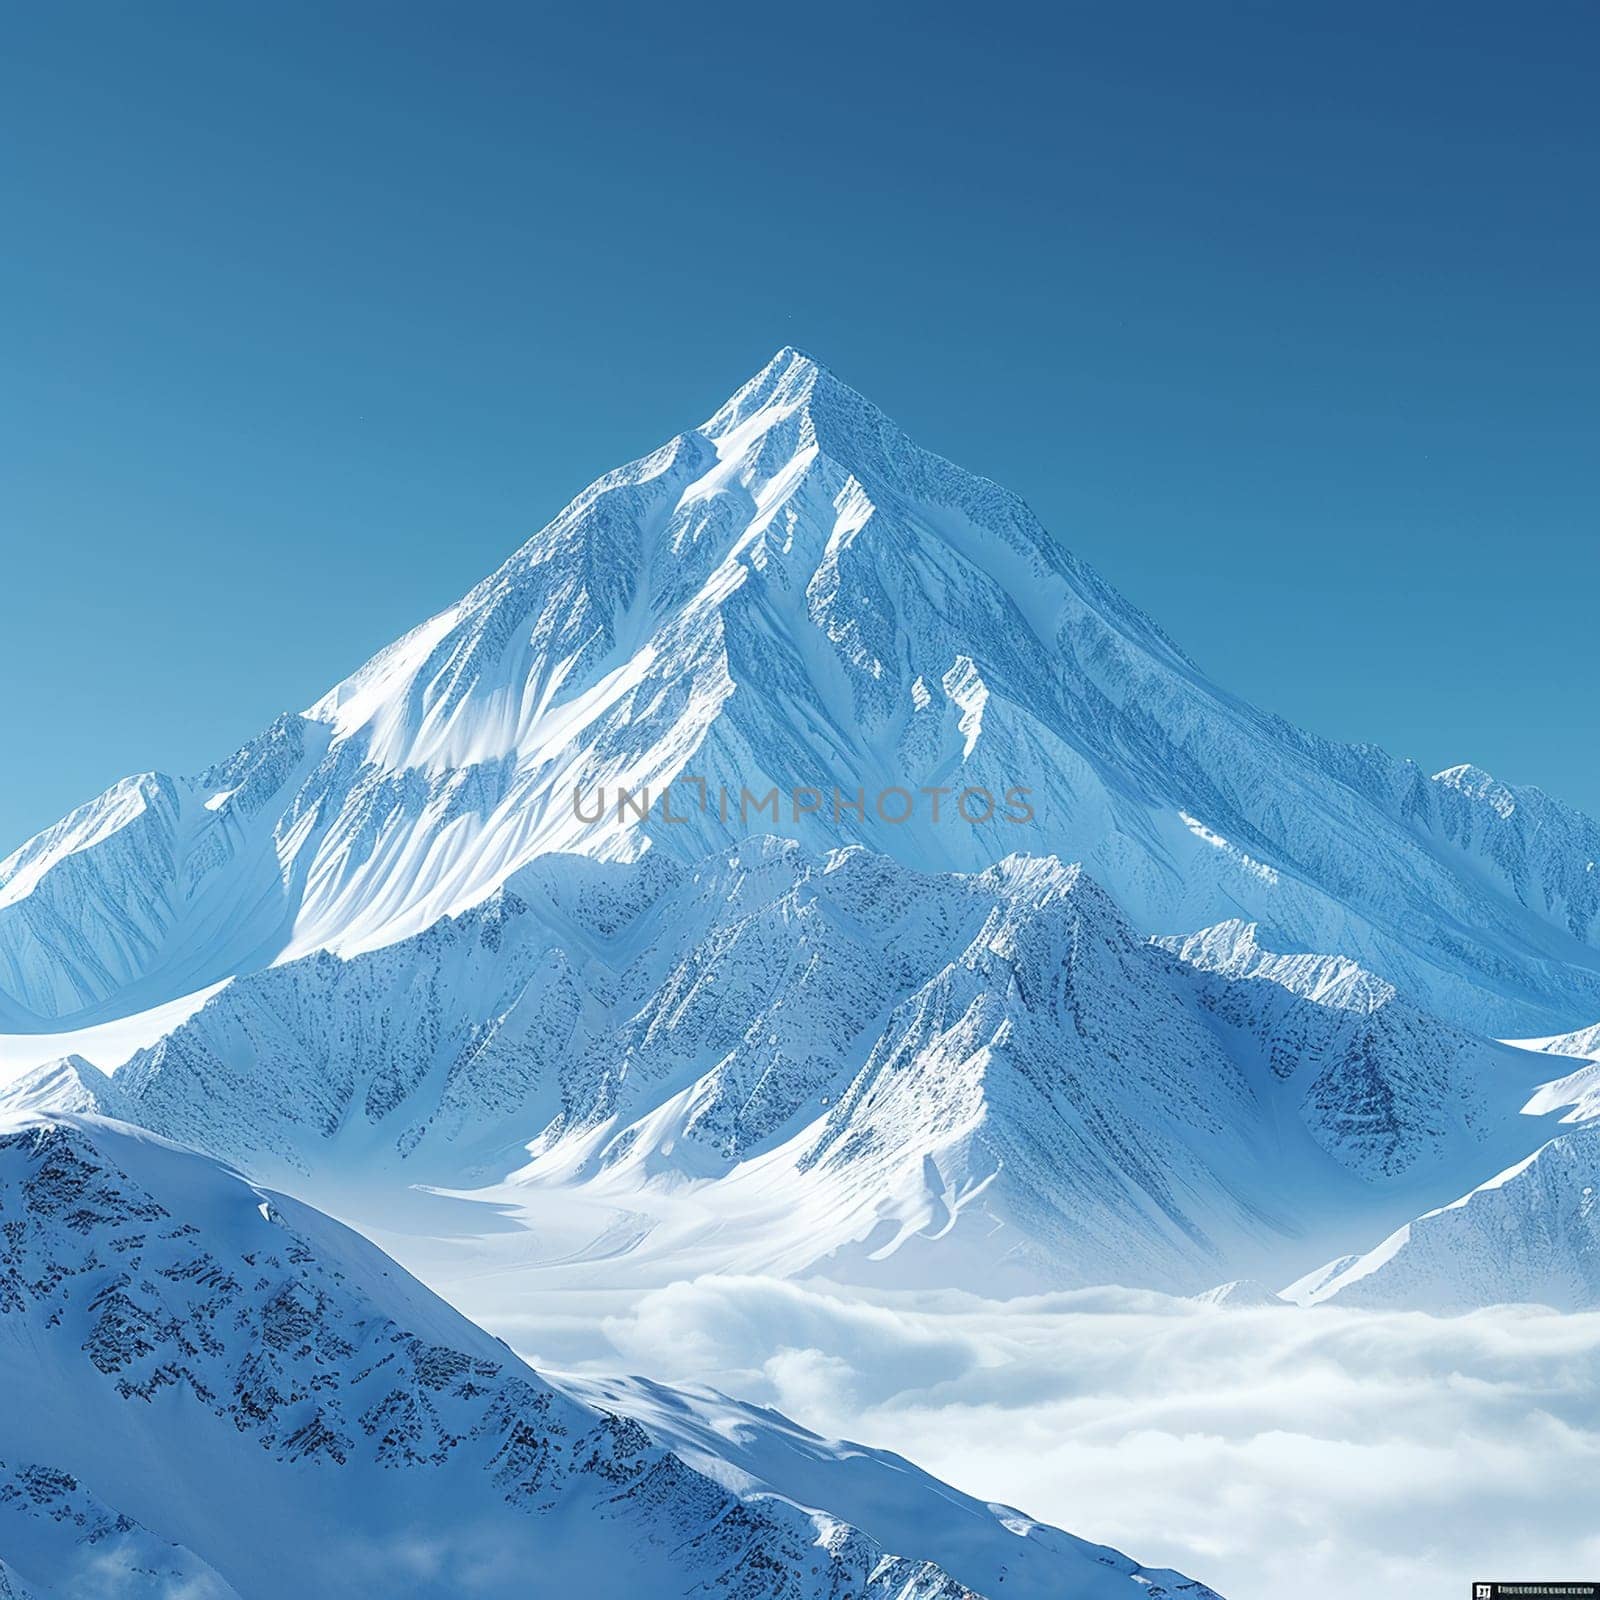 Snowy mountain peak under clear winter sky, symbolizing purity of Earth Hour.